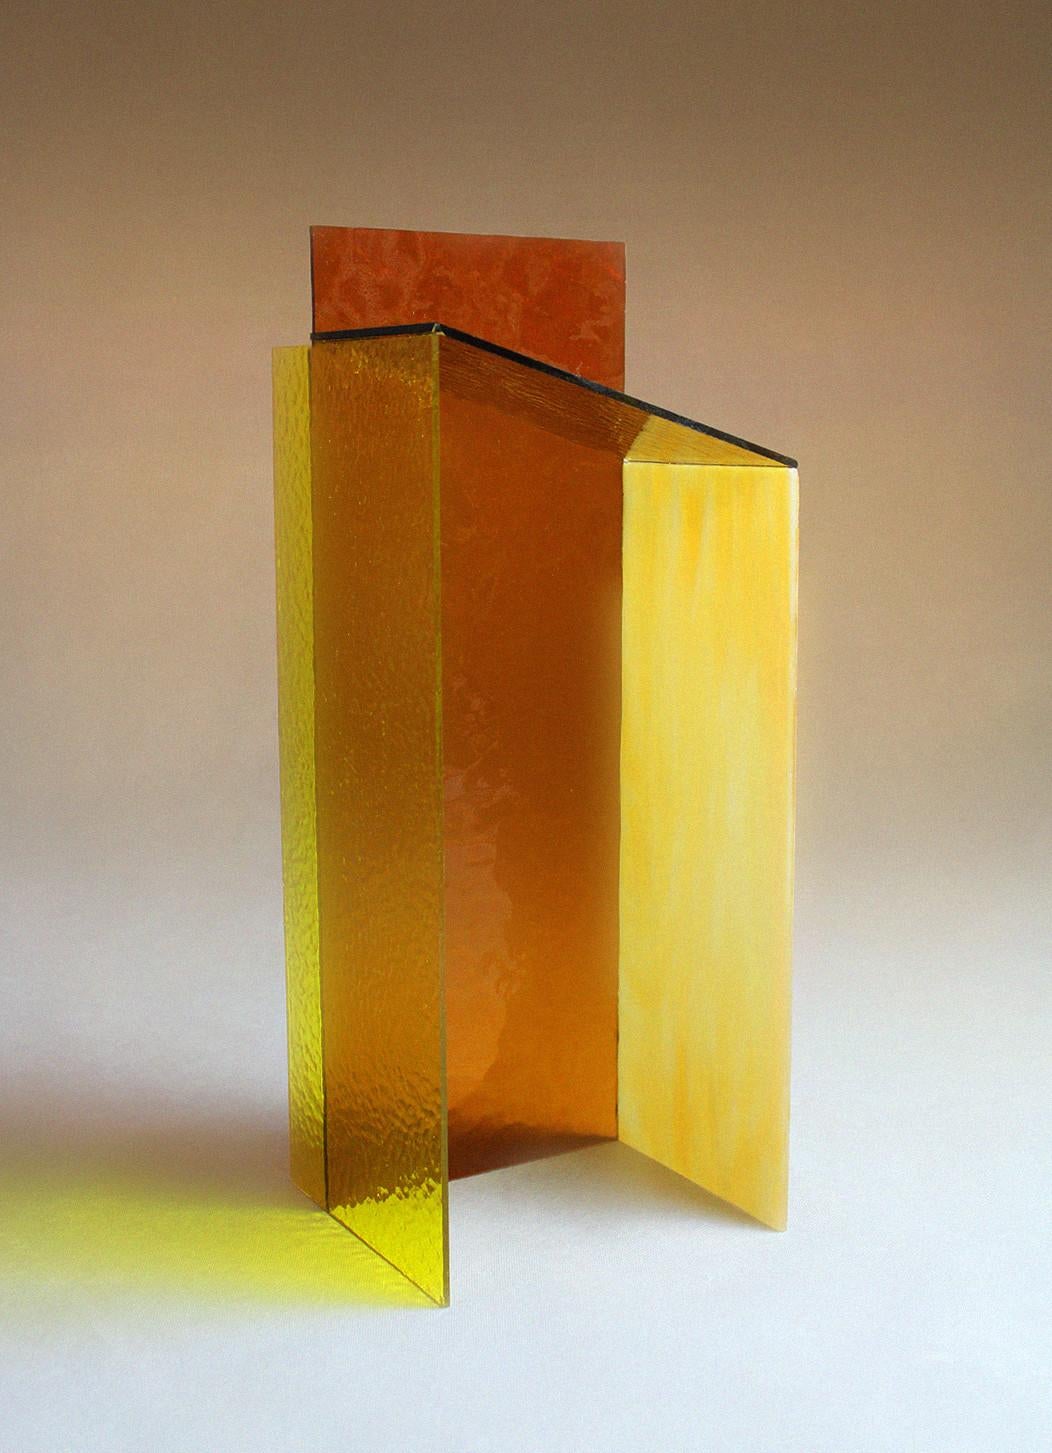 Each object from the Shape Series Collection by Studio Fleur Peters is unique. This yellow version is immediately catching the eye with its mixture of ochre, orange, yellow & cream marble. The materials of this glass object consist of opal marble